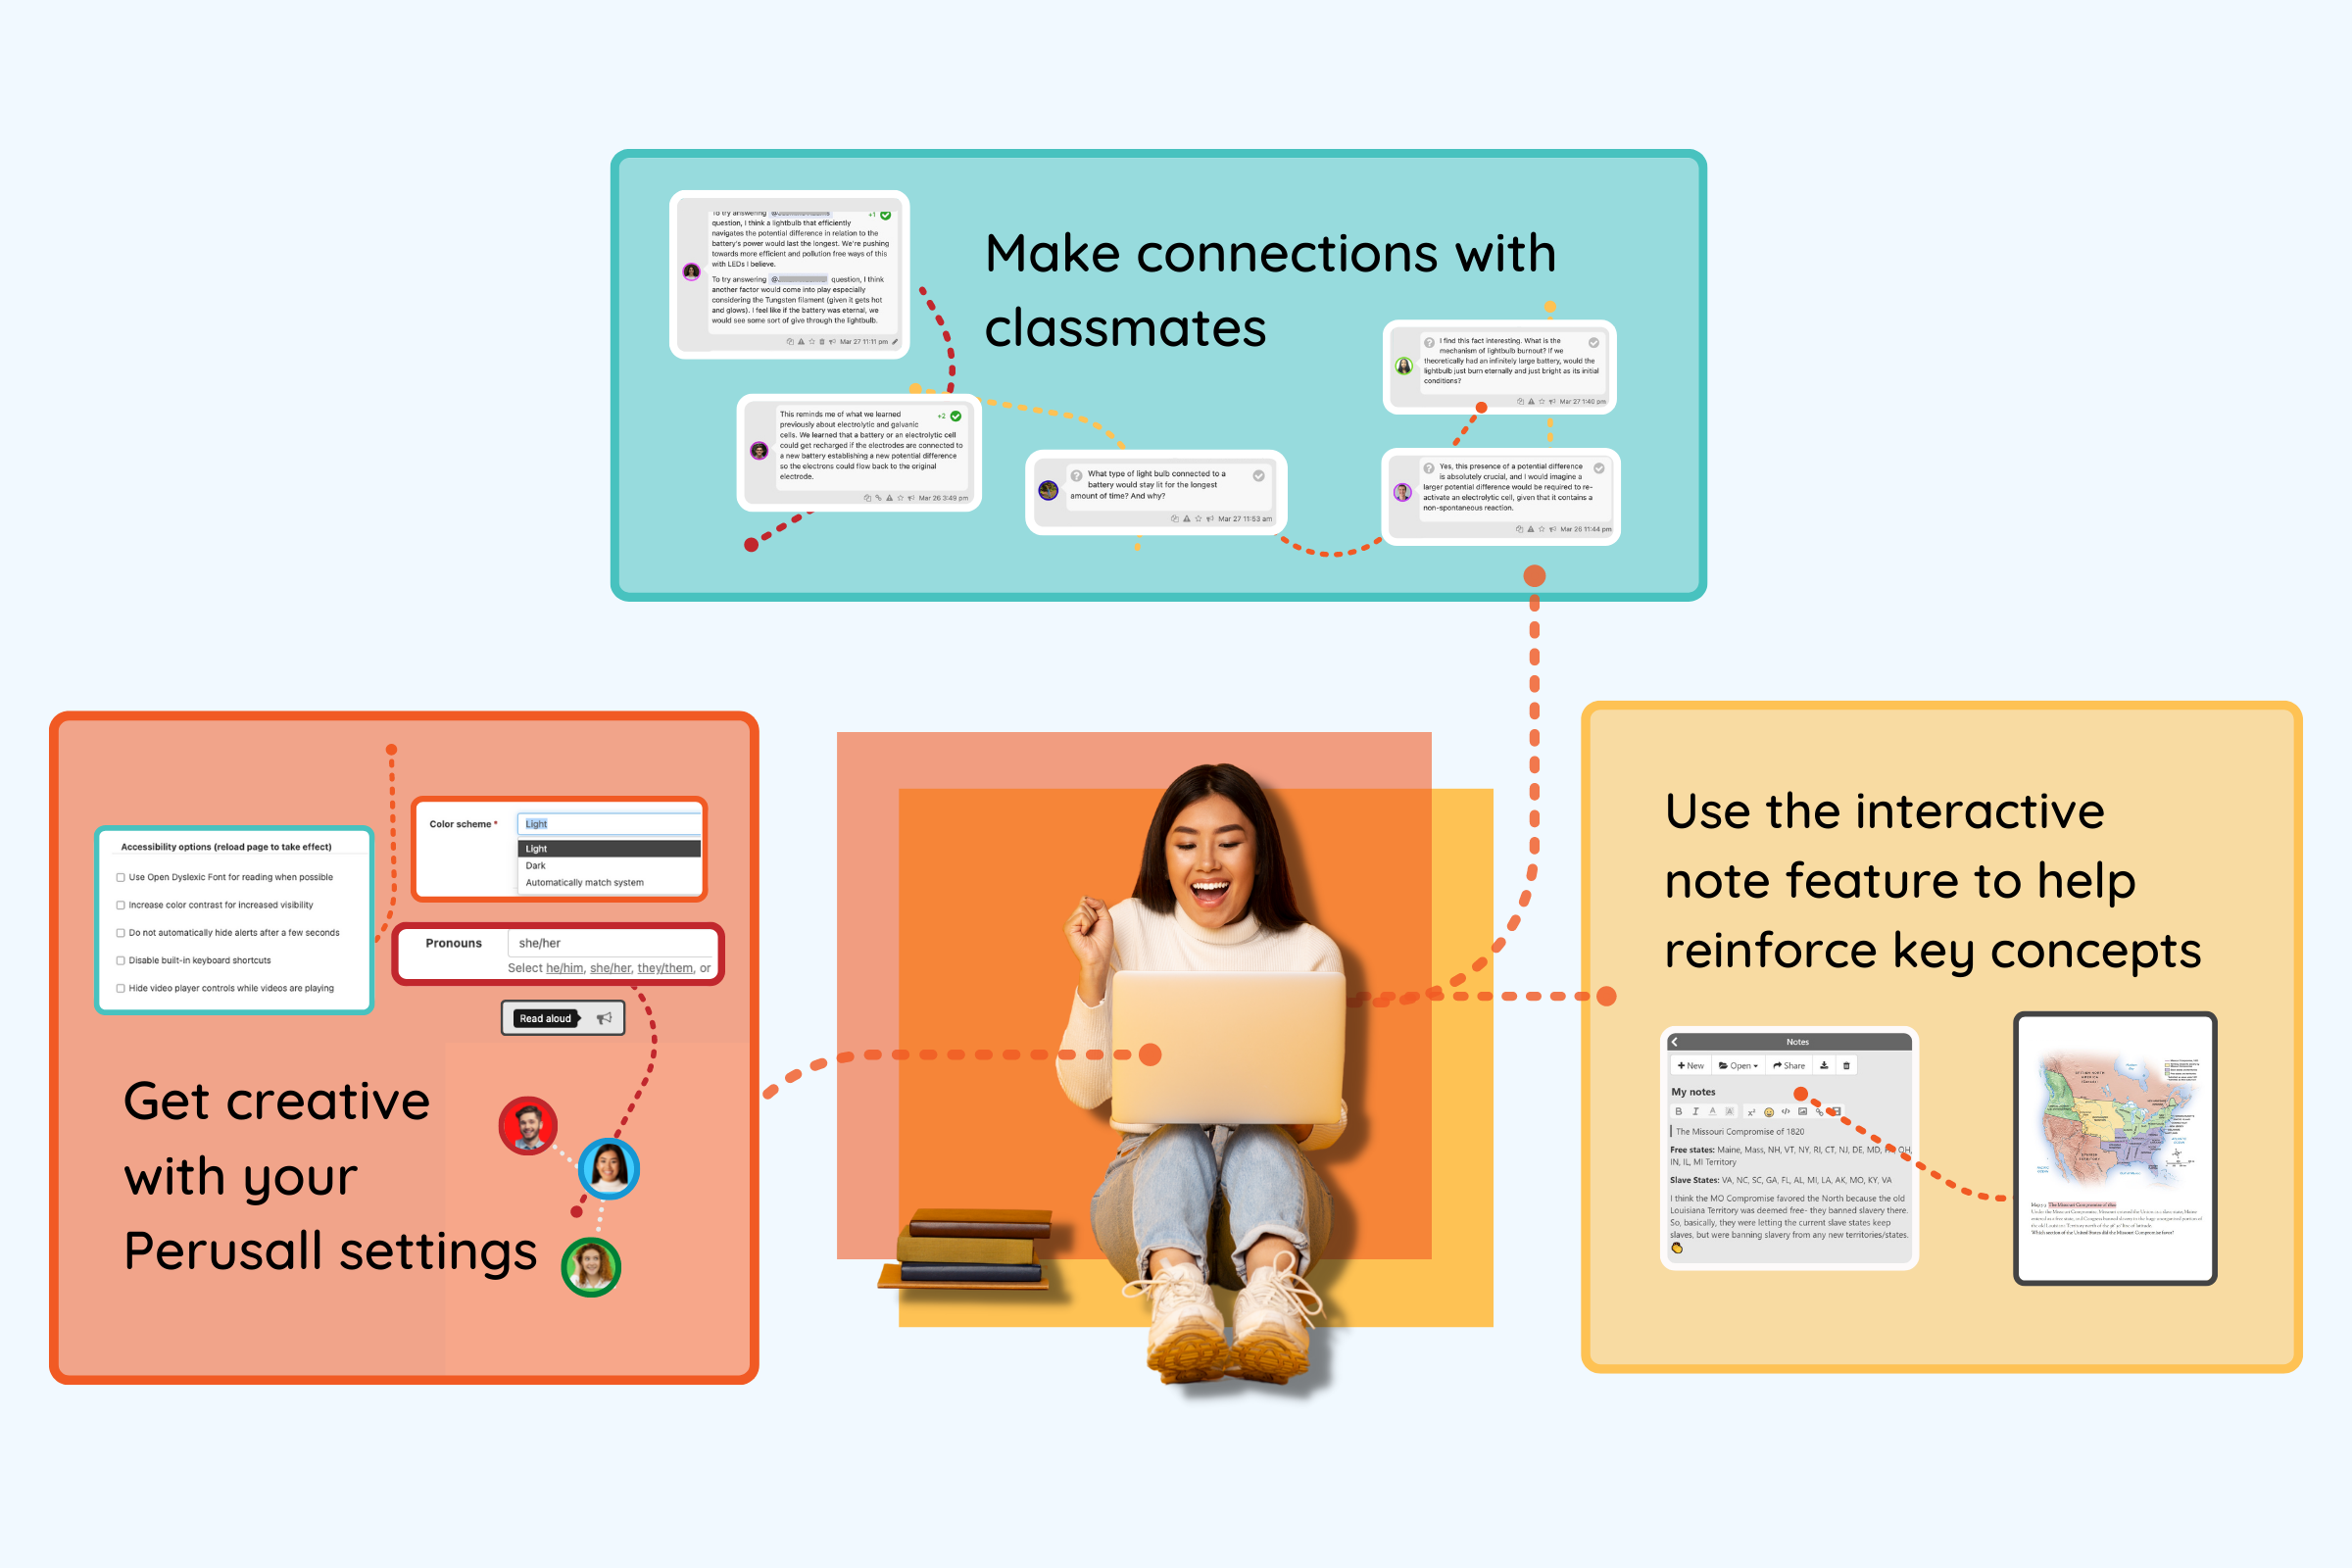 With Perusall, you can get creative with your Perusall settings, make connections with classmates, and use the interactive note feature to help reinforce key concepts. 